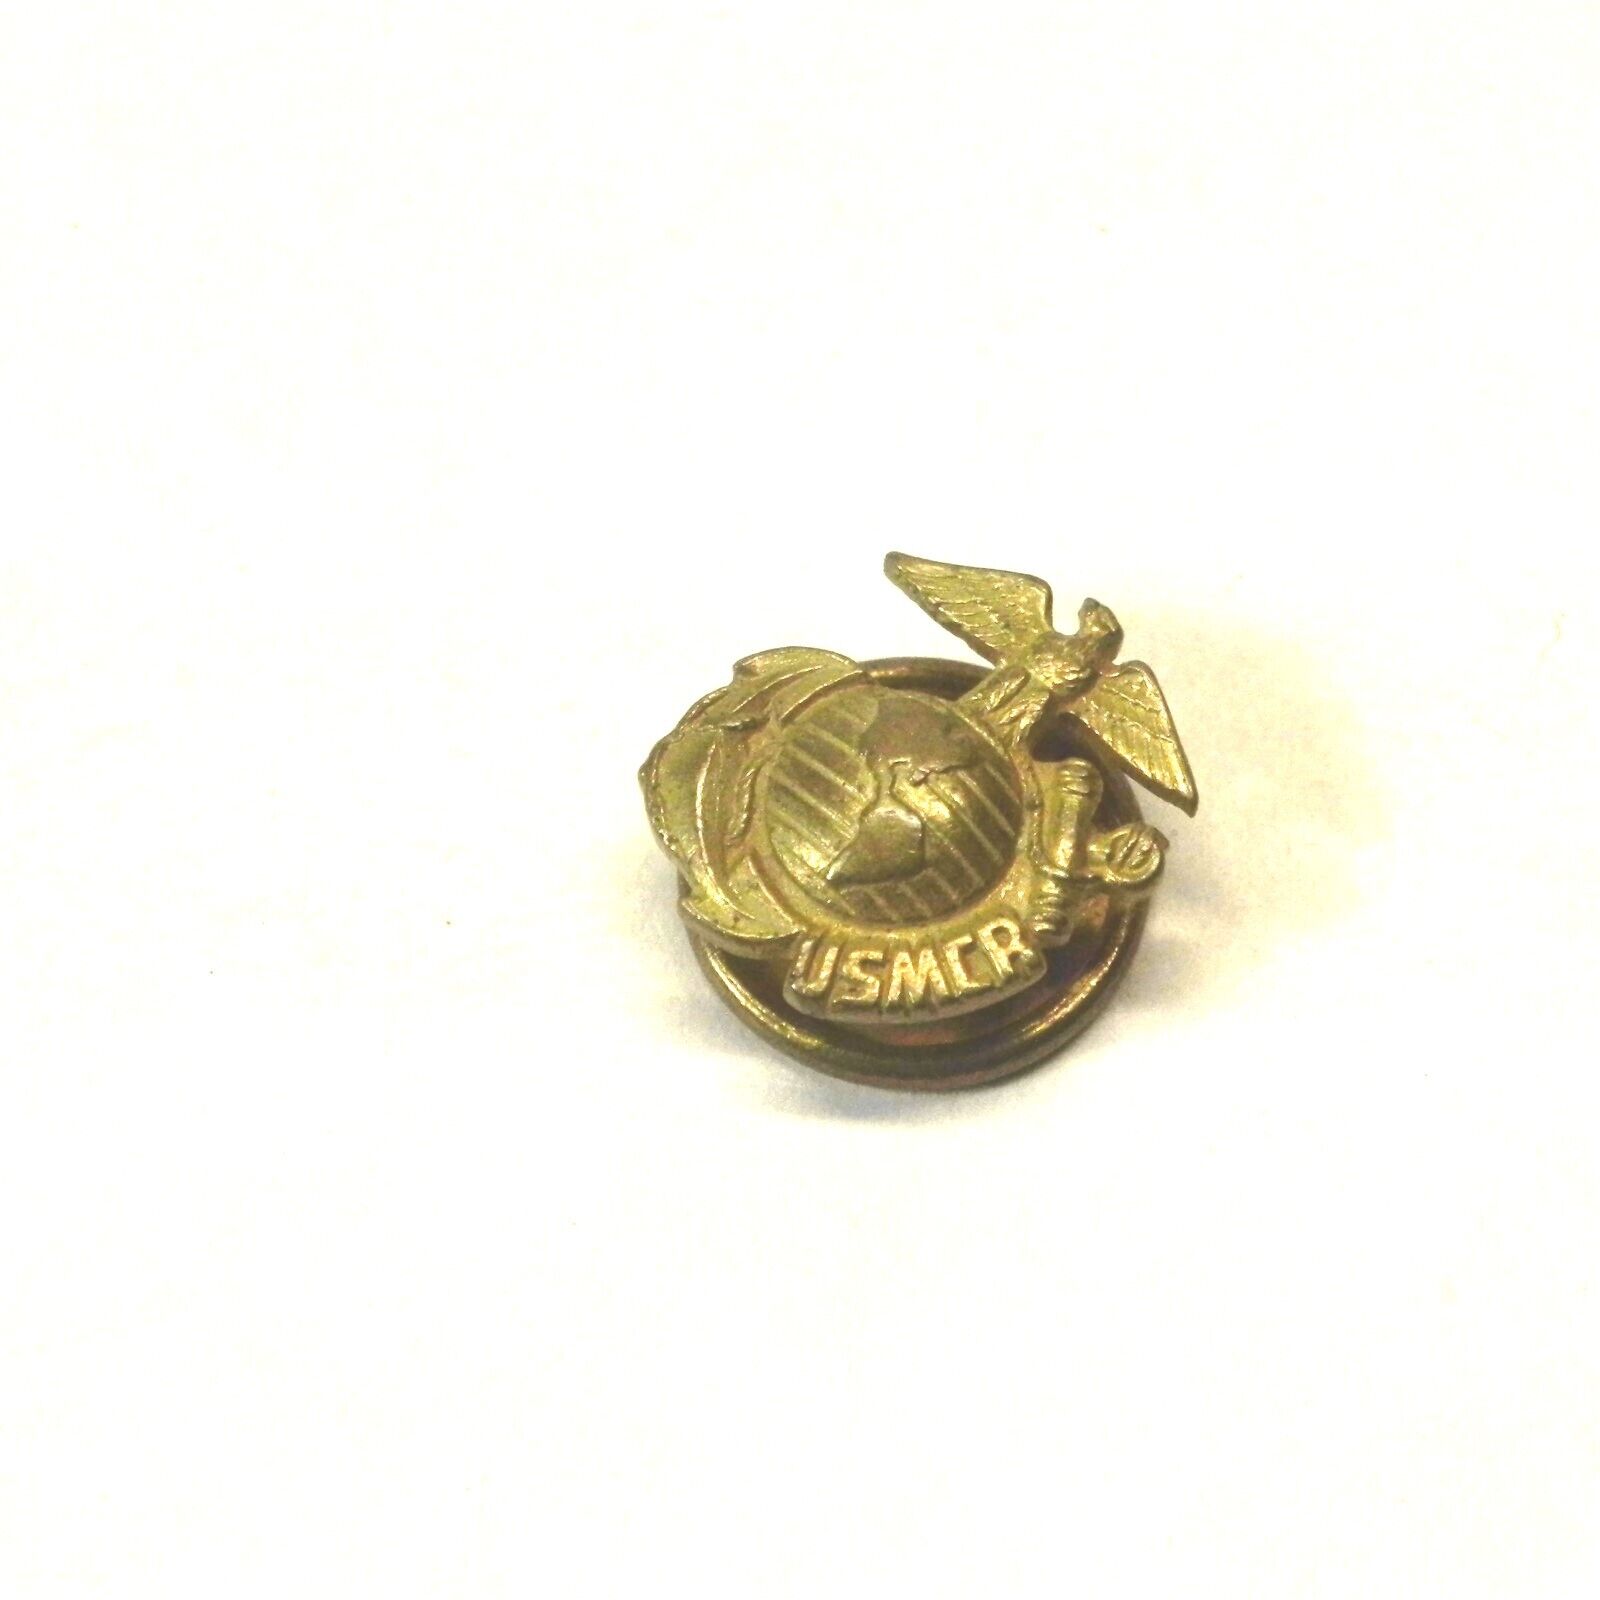 VINTAGE USMCR LAPEL PIN BUTTON WW2 WORLD WAR 2 MARINE CORPS RESERVES PRE OWNED 